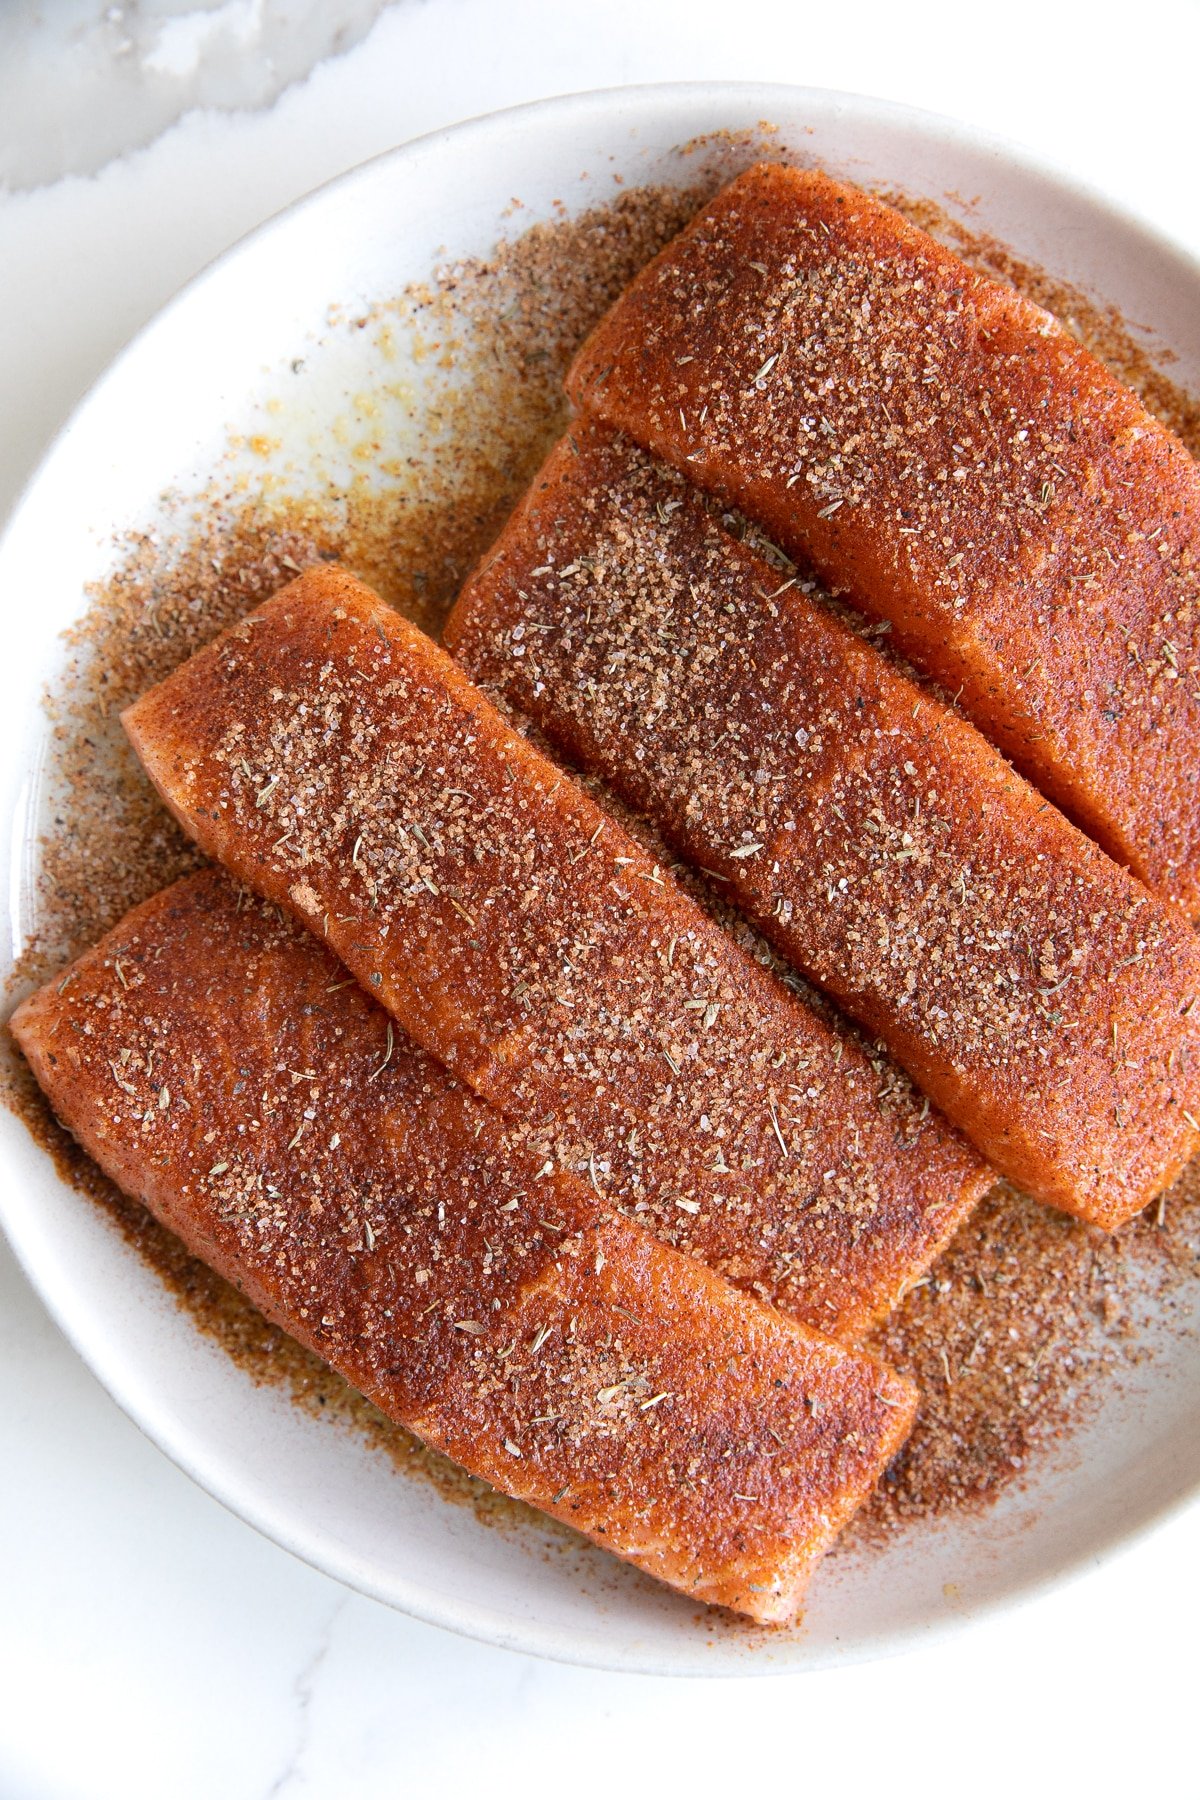 Four seasoned salmon fillets on a white plate.